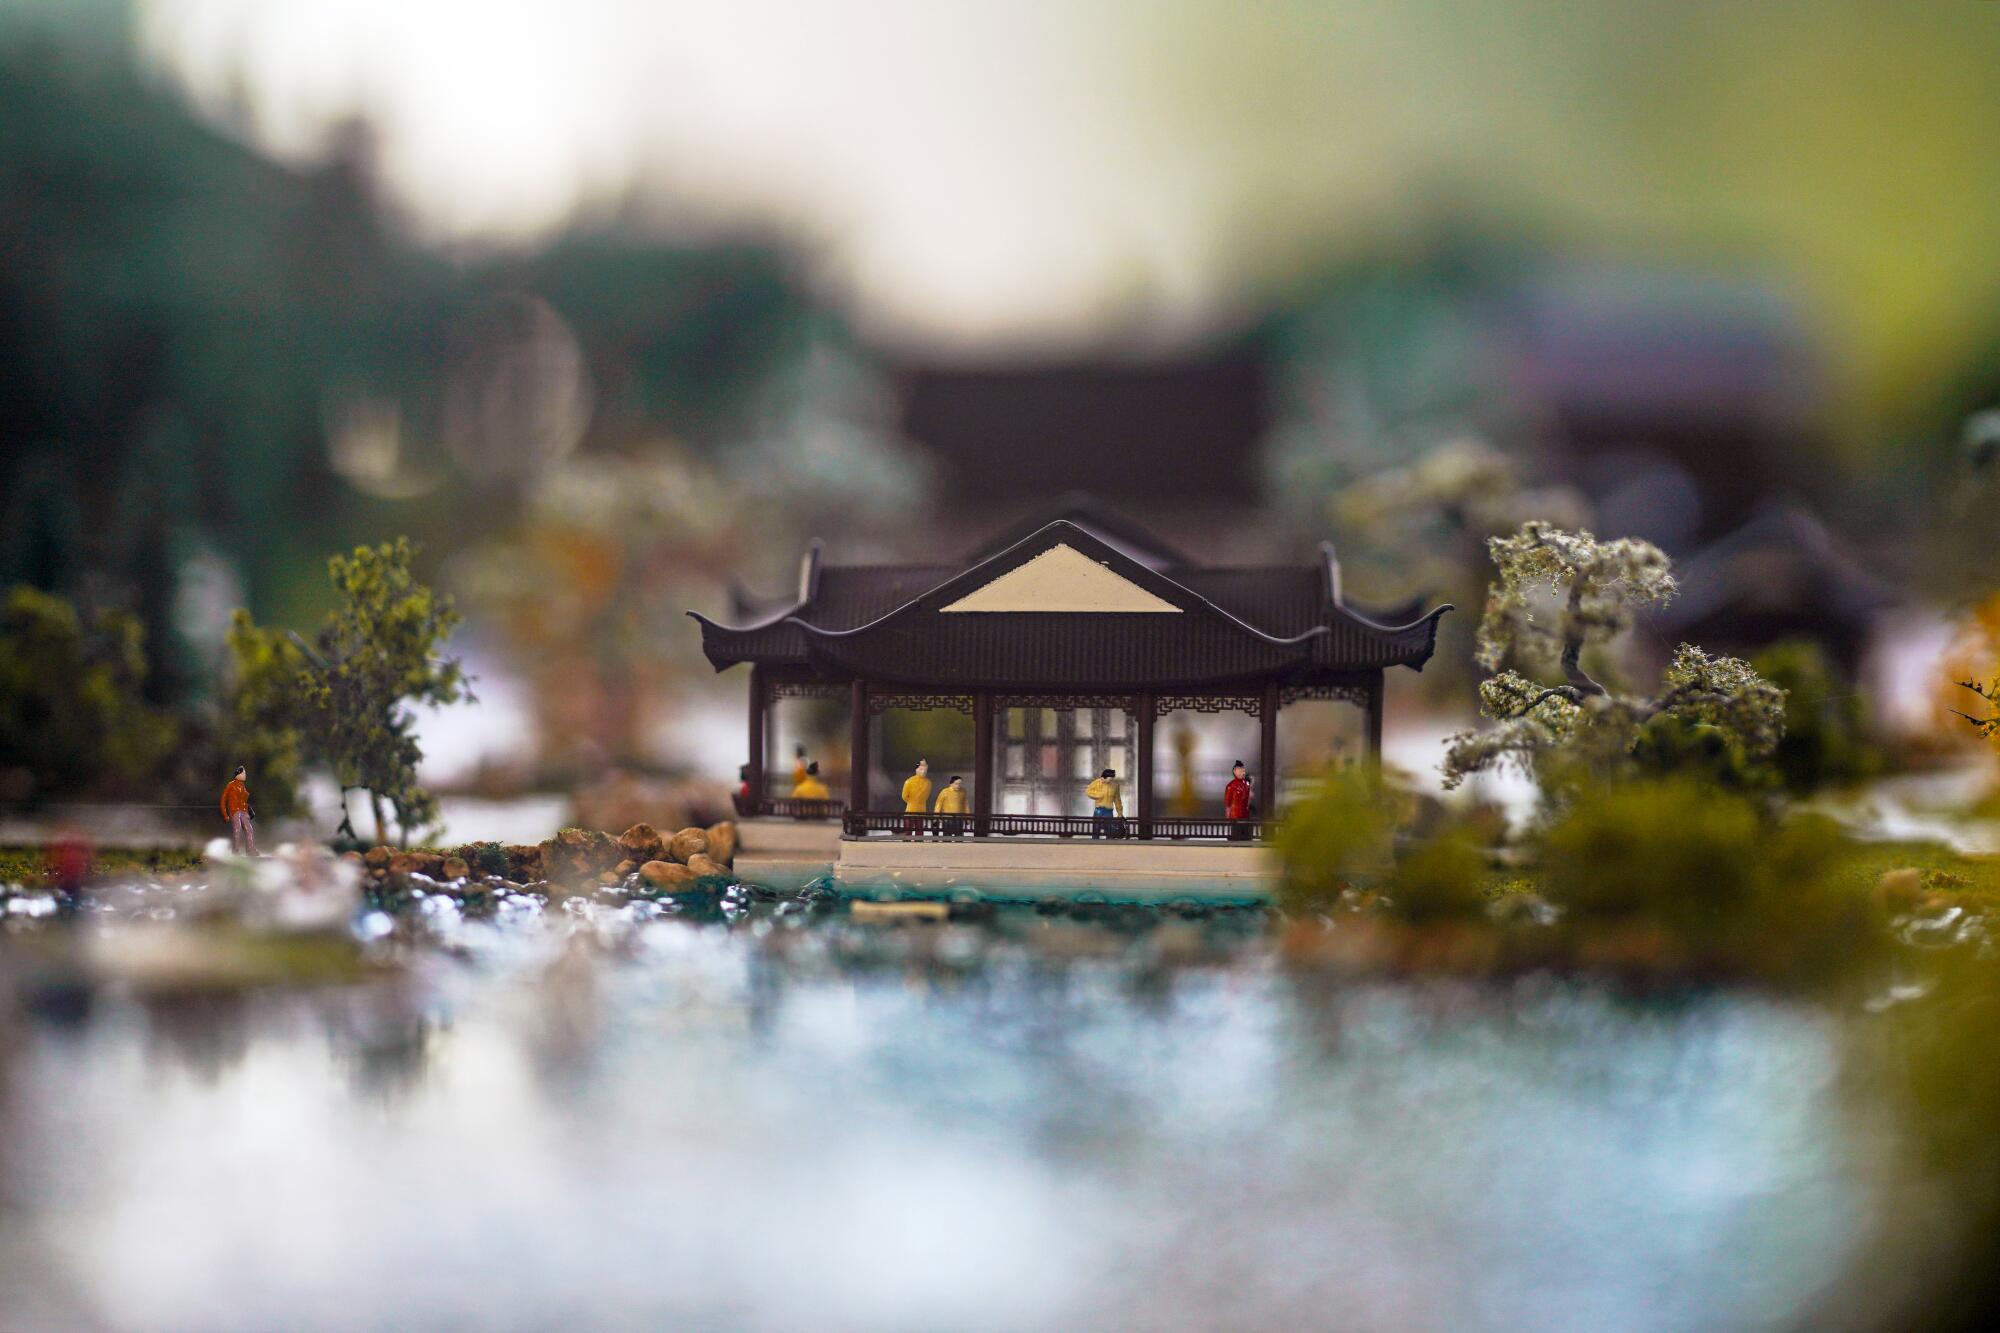 A miniature display of the Huntington's Chinese Garden.